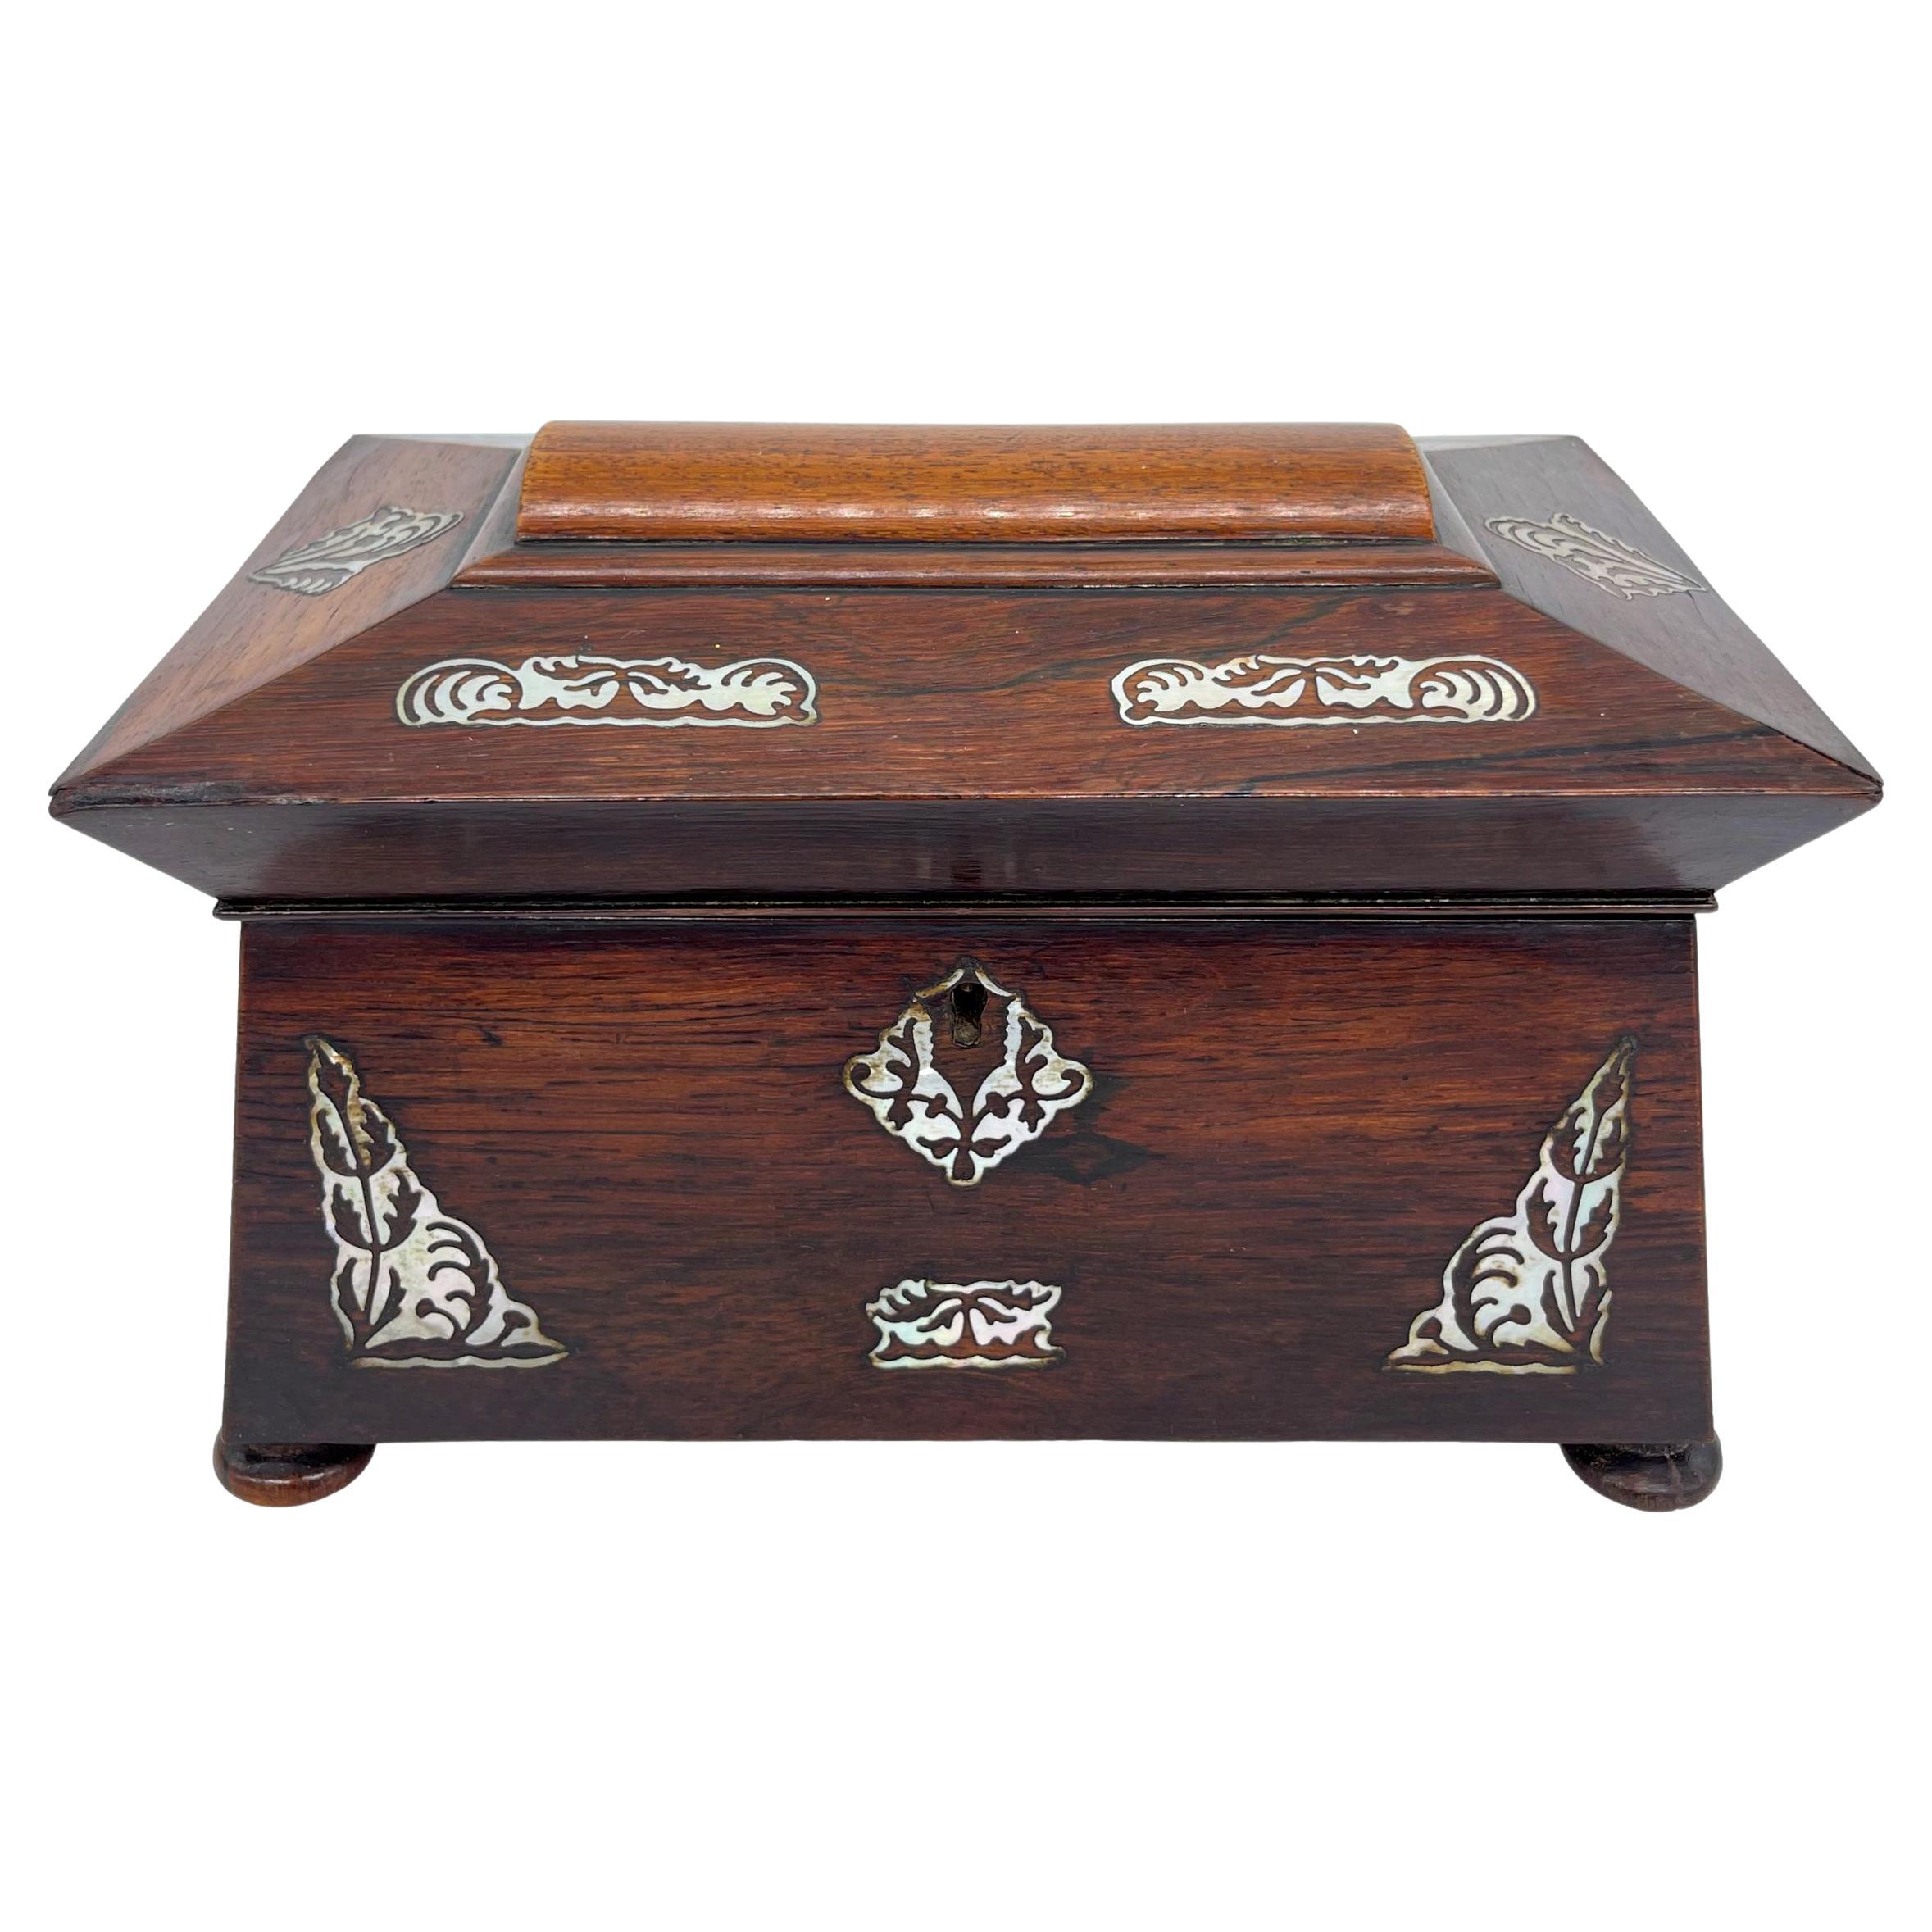 William IV Rosewood and Mother-of-Pearl Inlaid Tea Caddy, English, ca. 1835